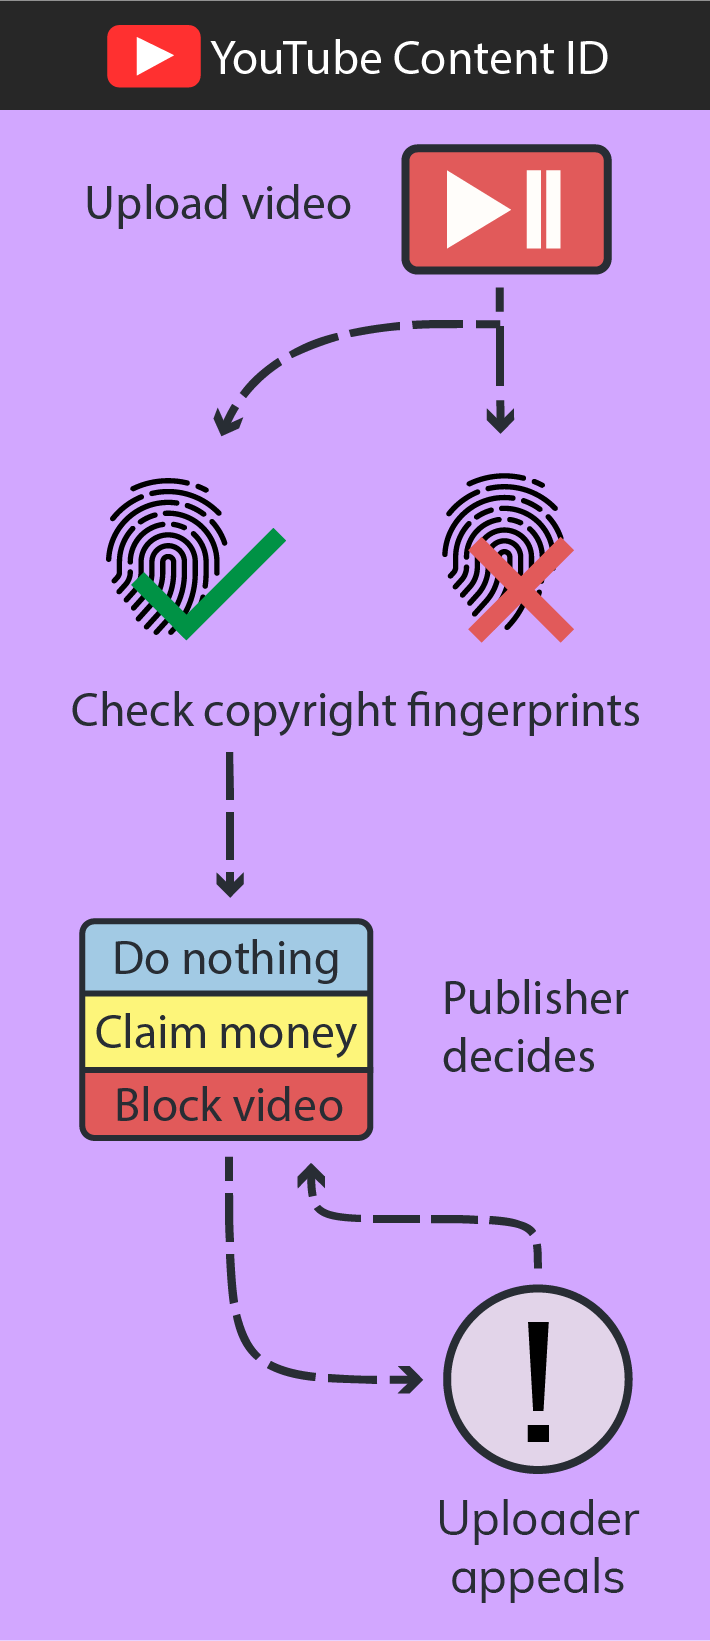 YouTube Content ID schematic